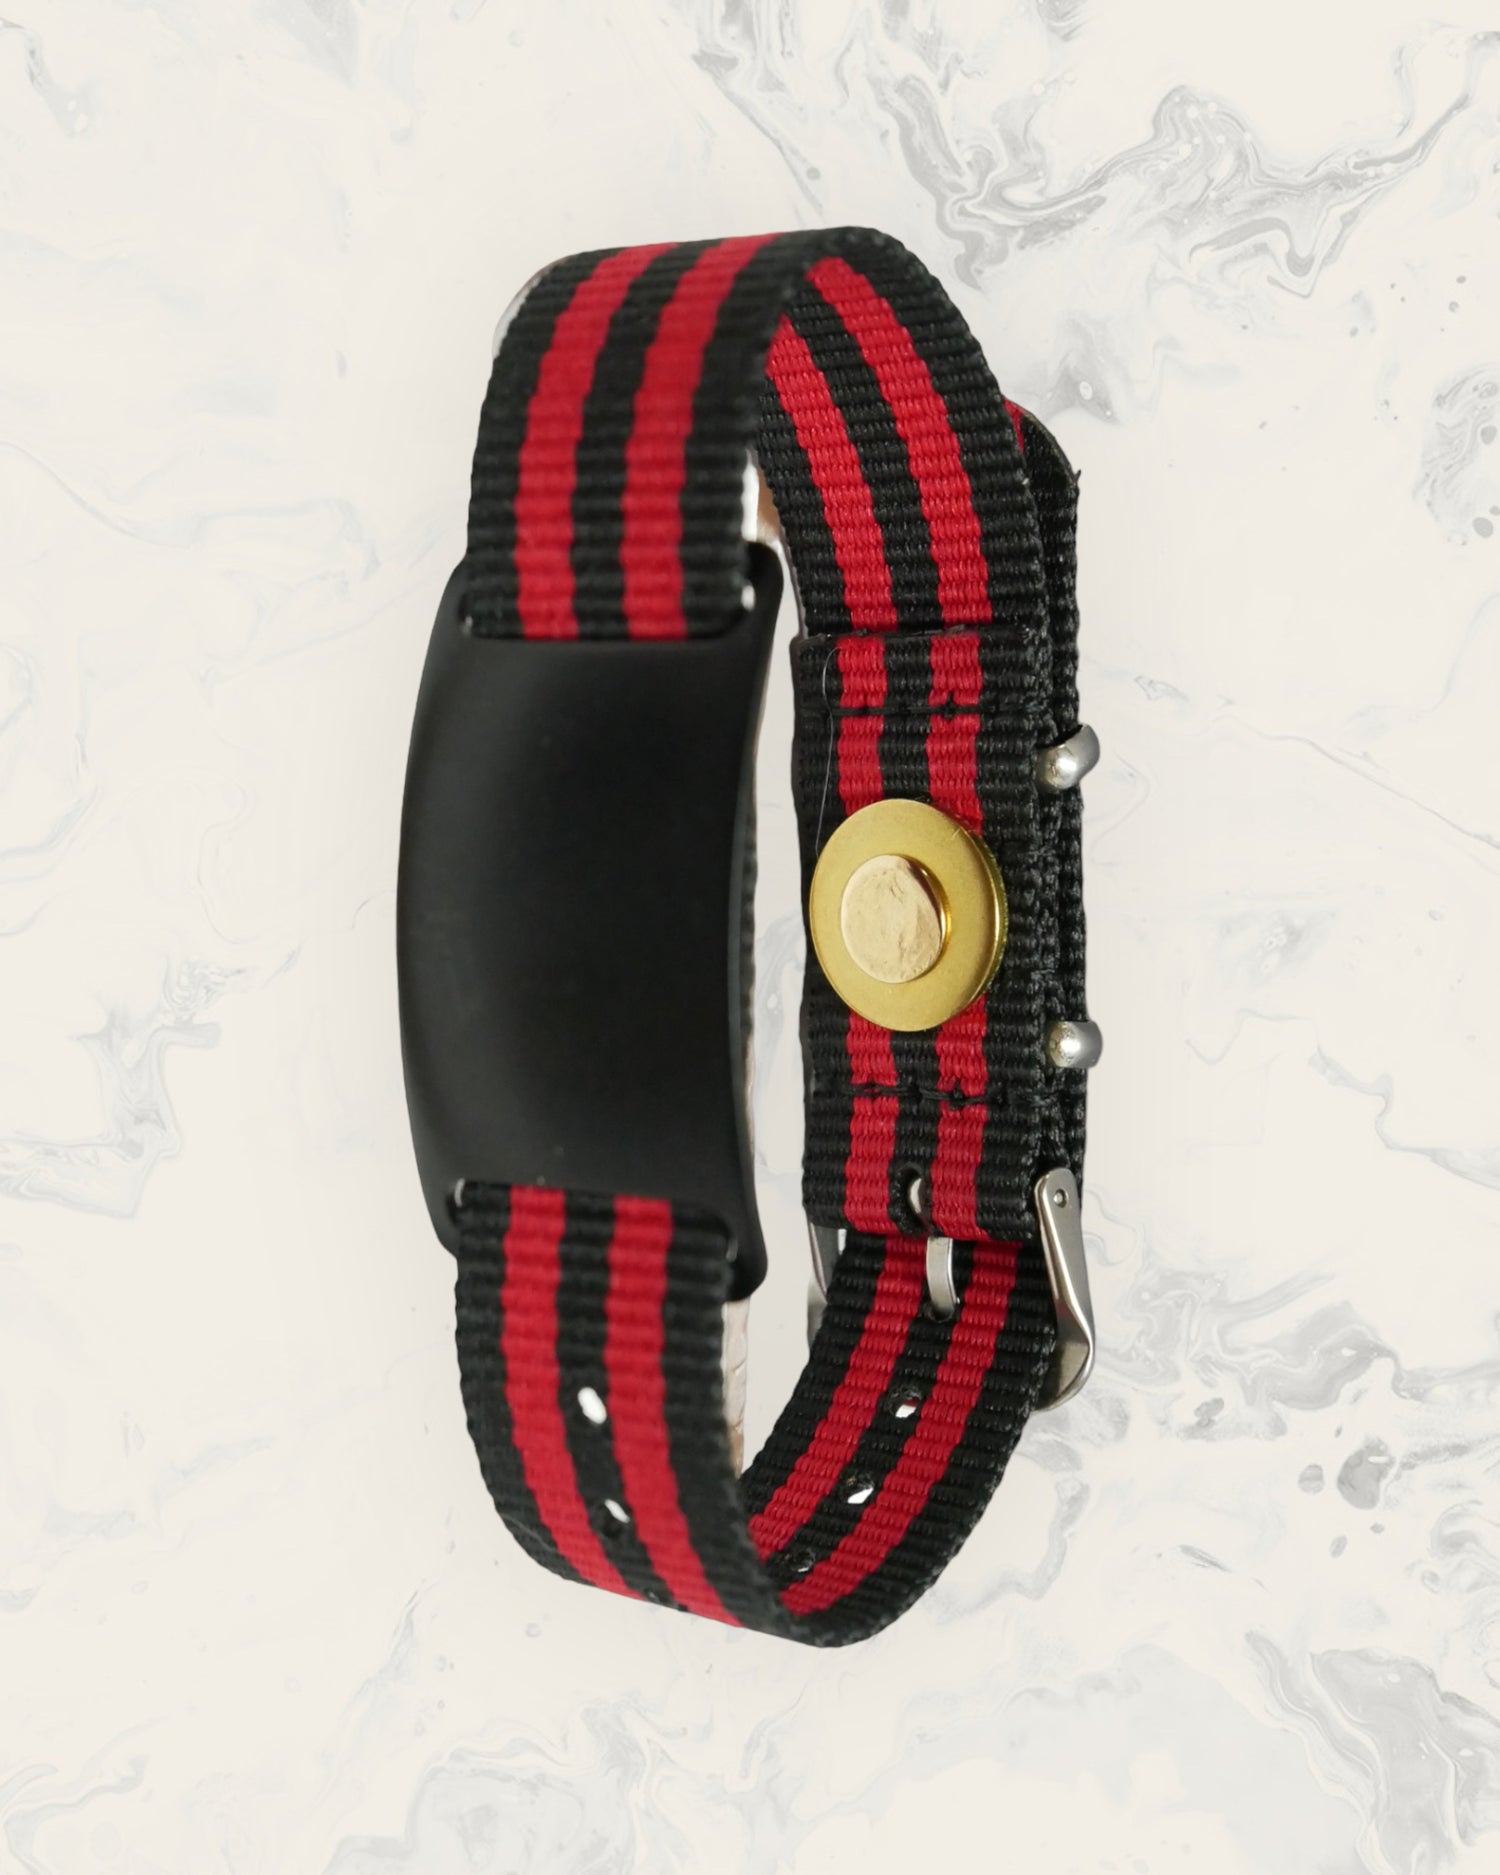 Natural Pain Relief and EMF Protection Bracelet Nylon Band Color Black and Red Striped with a Black Slider